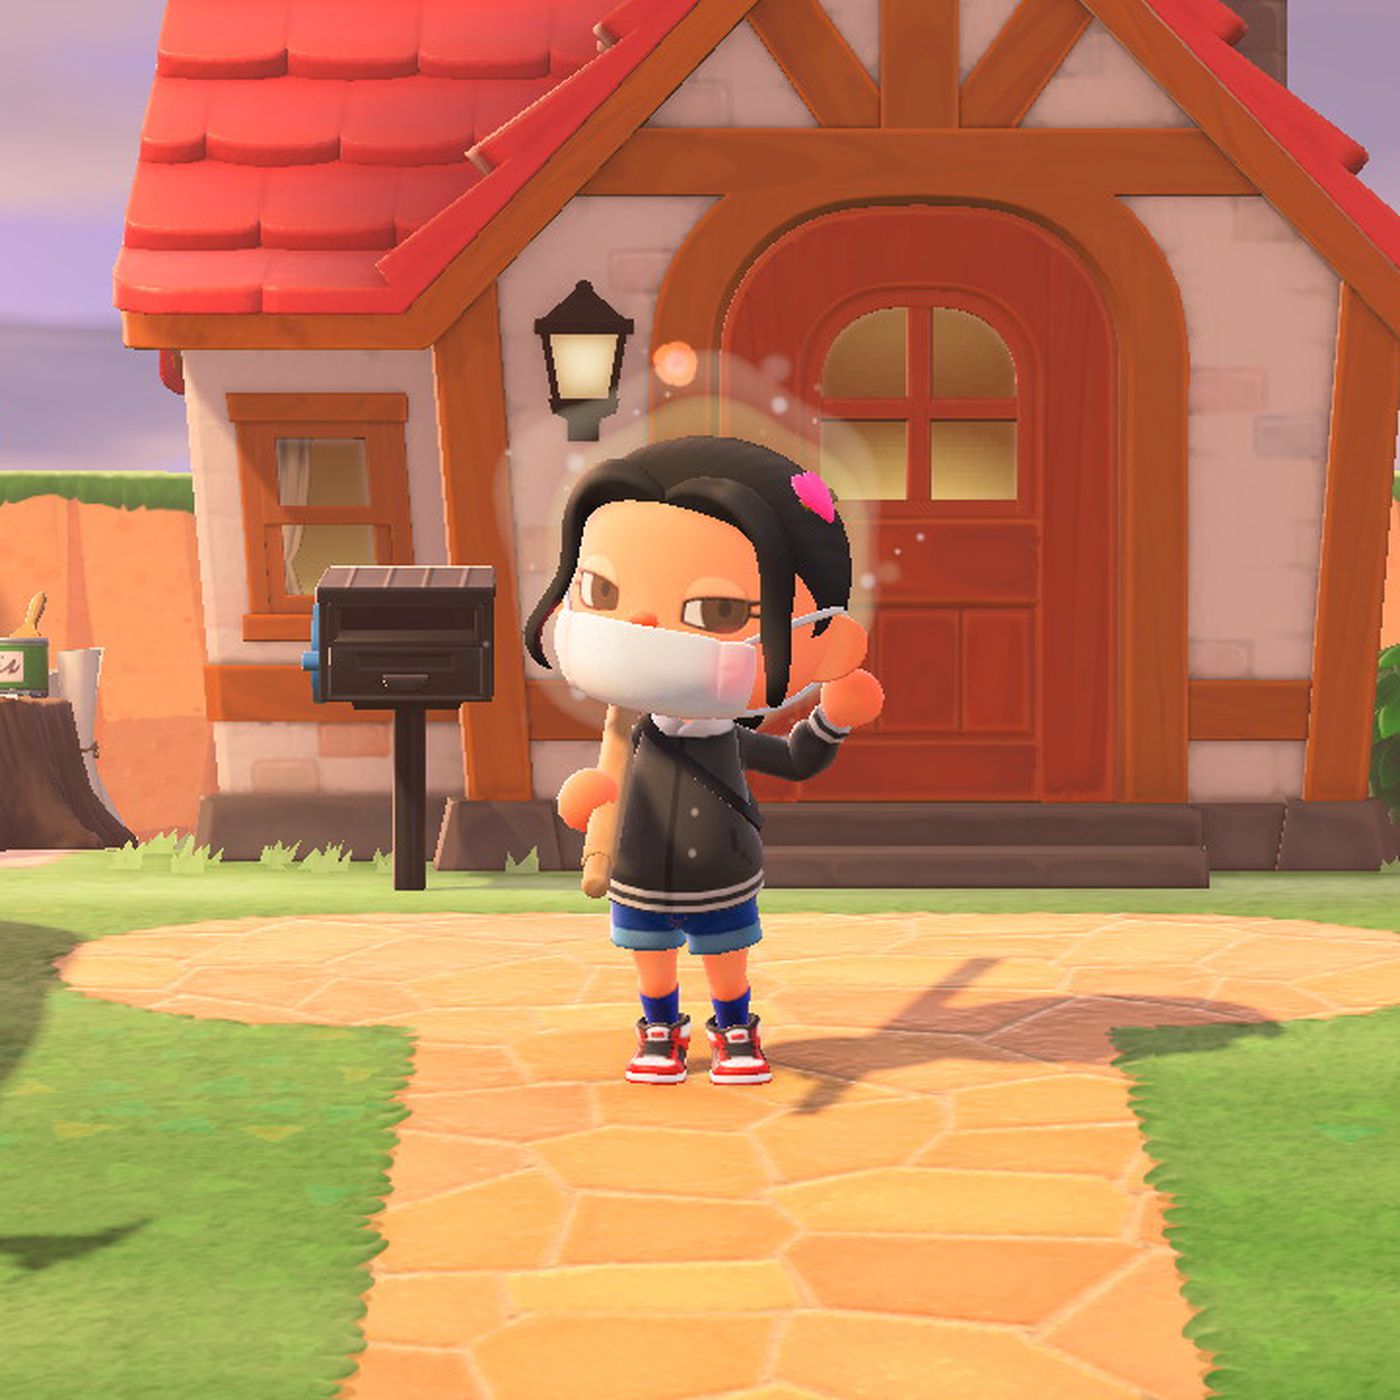 Full Hairstyles list — Animal Crossing New Horizons guide   Polygon